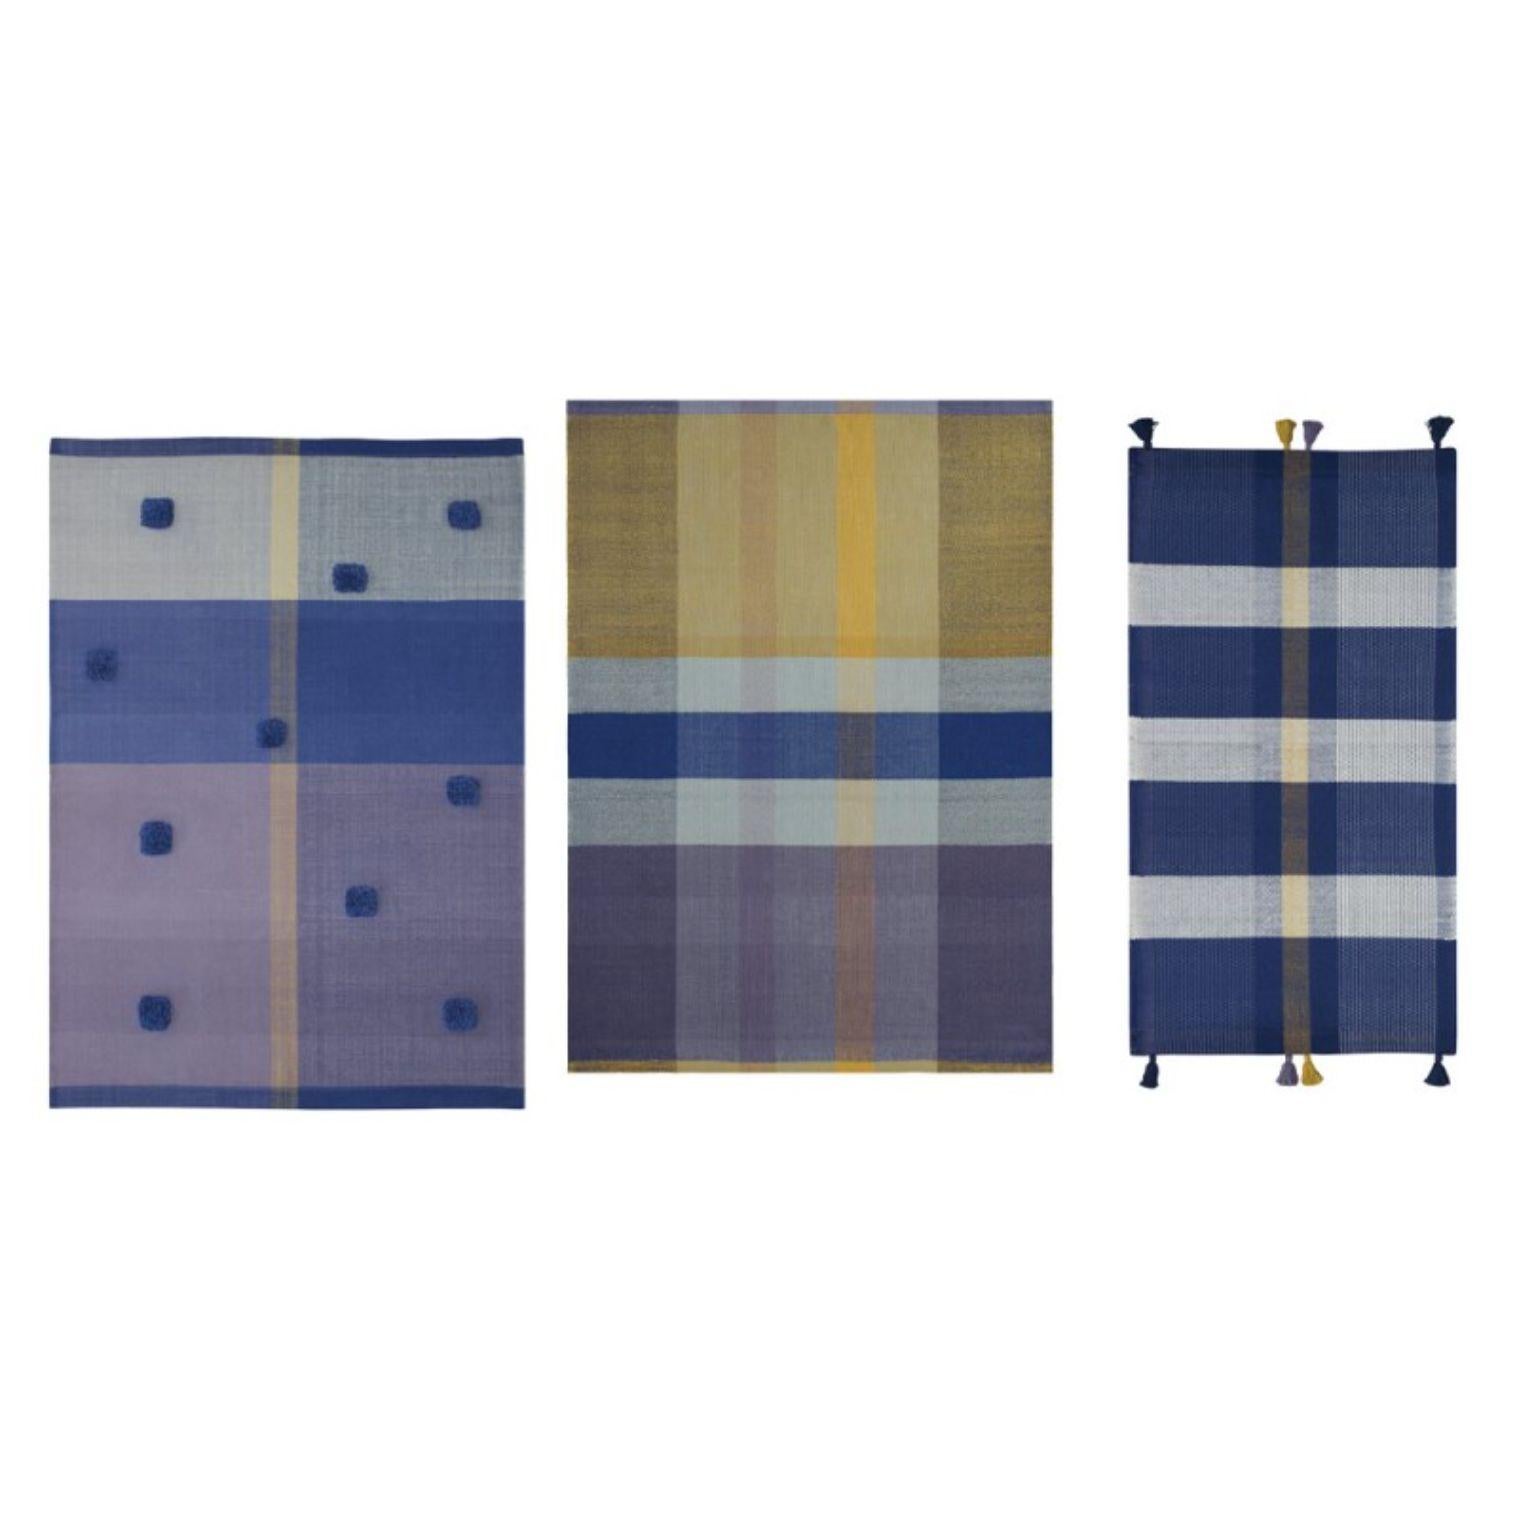 Set of 3 Alegoría rugs by Bi Yuu
Dimensions: D 80 x 150 H cm/ D 80 x 150 H /D 80 x H 150
Material: Merino wool/ cotton

She founded Bi Yuu with the vision that the work would be conceived via
collaborative processes with specific artisan